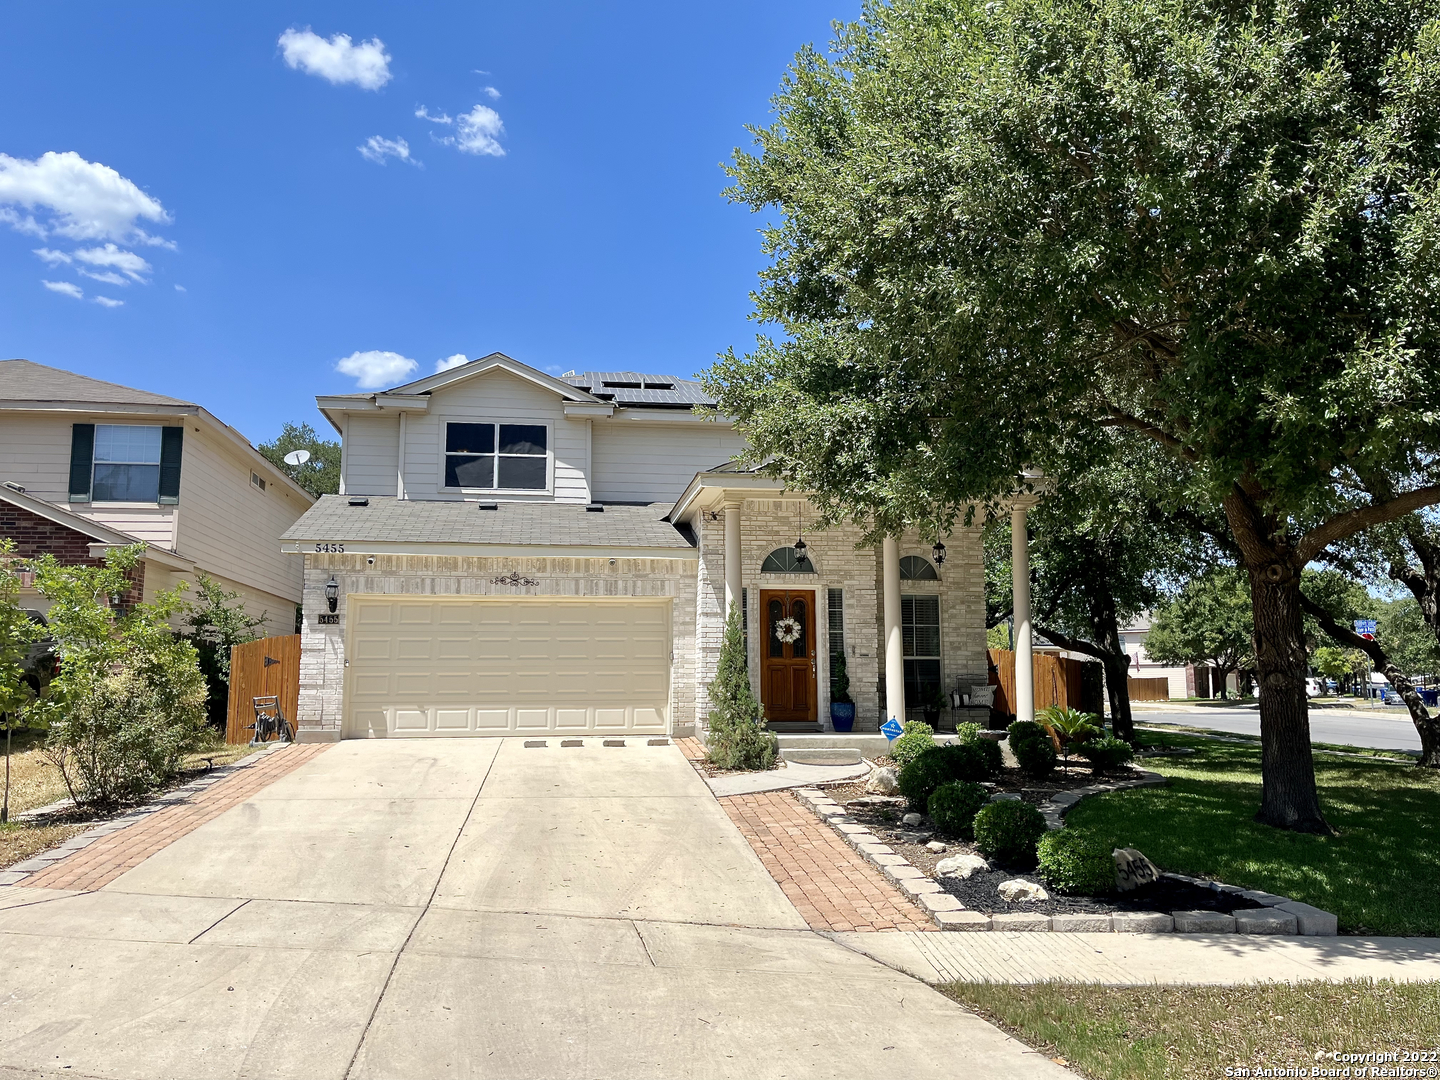 Come see this stunning home in the desirable Steubing Ranch subdivision before it is too late! This jewel has a meticulously landscaped yard with lighting and great curb appeal!  Pride of ownership shows!  This gem has 4 bedrooms and 3.5 bathrooms to fit your needs.  There is a spacious main bedroom on the first floor with a bathroom that has a garden tub, shower, plus a big walk-in closet!  Two eating areas plus an island in the kitchen that has granite countertops and lots of cabinets plus Samsung stove and microwave installed (2022). The second floor has three large bedrooms and 2 full bathrooms, one is a jack and Jill bath between two bedrooms.  All bedrooms have walk-in closets.   Plus, this home has a roomy family room/media room upstairs that can also fit a home office area.  All main areas and bedrooms have elegant crown molding!  This beauty has new paint throughout the house.   Carpet installed upstairs and in the master bedroom (2022).   All of the toilets have been replaced.  Ceiling fans added to all of the bedrooms and the living room. No neighbors on one side or on the back. Beautiful mature oak trees on this corner lot provide lots of shade. Lawn has an irrigation system. Water filtration system and water softener installed.  Solar panels (22) installed (2015).  Roof (2015). Plus, the Steubing Ranch subdivision has a pool and a park!  Steubing Ranch Elementary and Harris Middle School are nearby.  This home has easy access to 1604 and I-35.  You don't want to miss seeing this beauty!